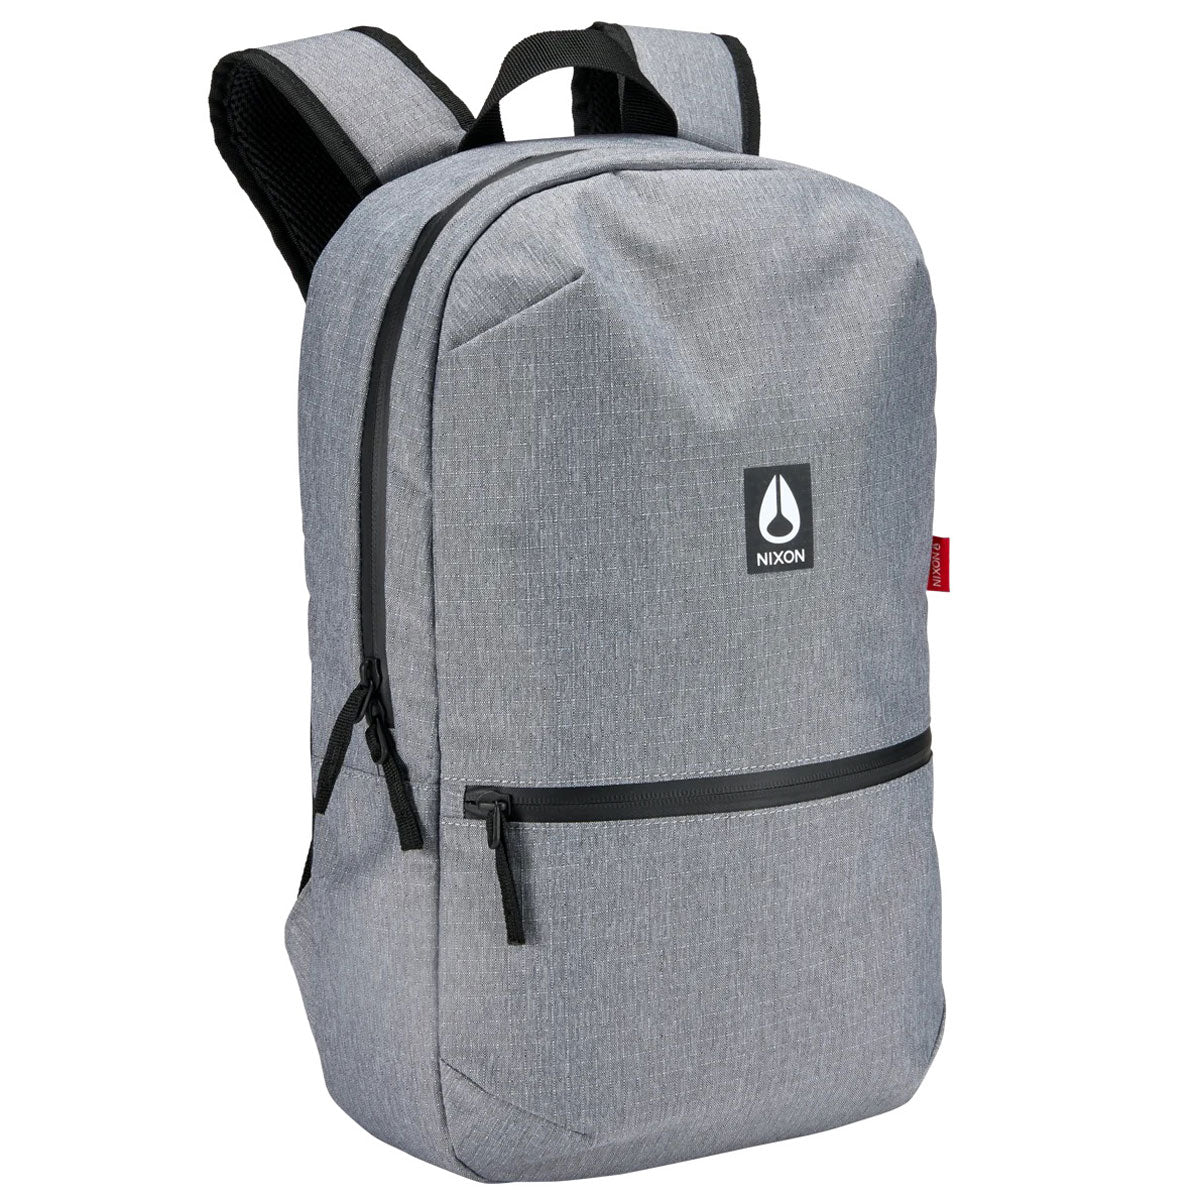 Nixon Day Trippin' Backpack - Heather Gray image 3